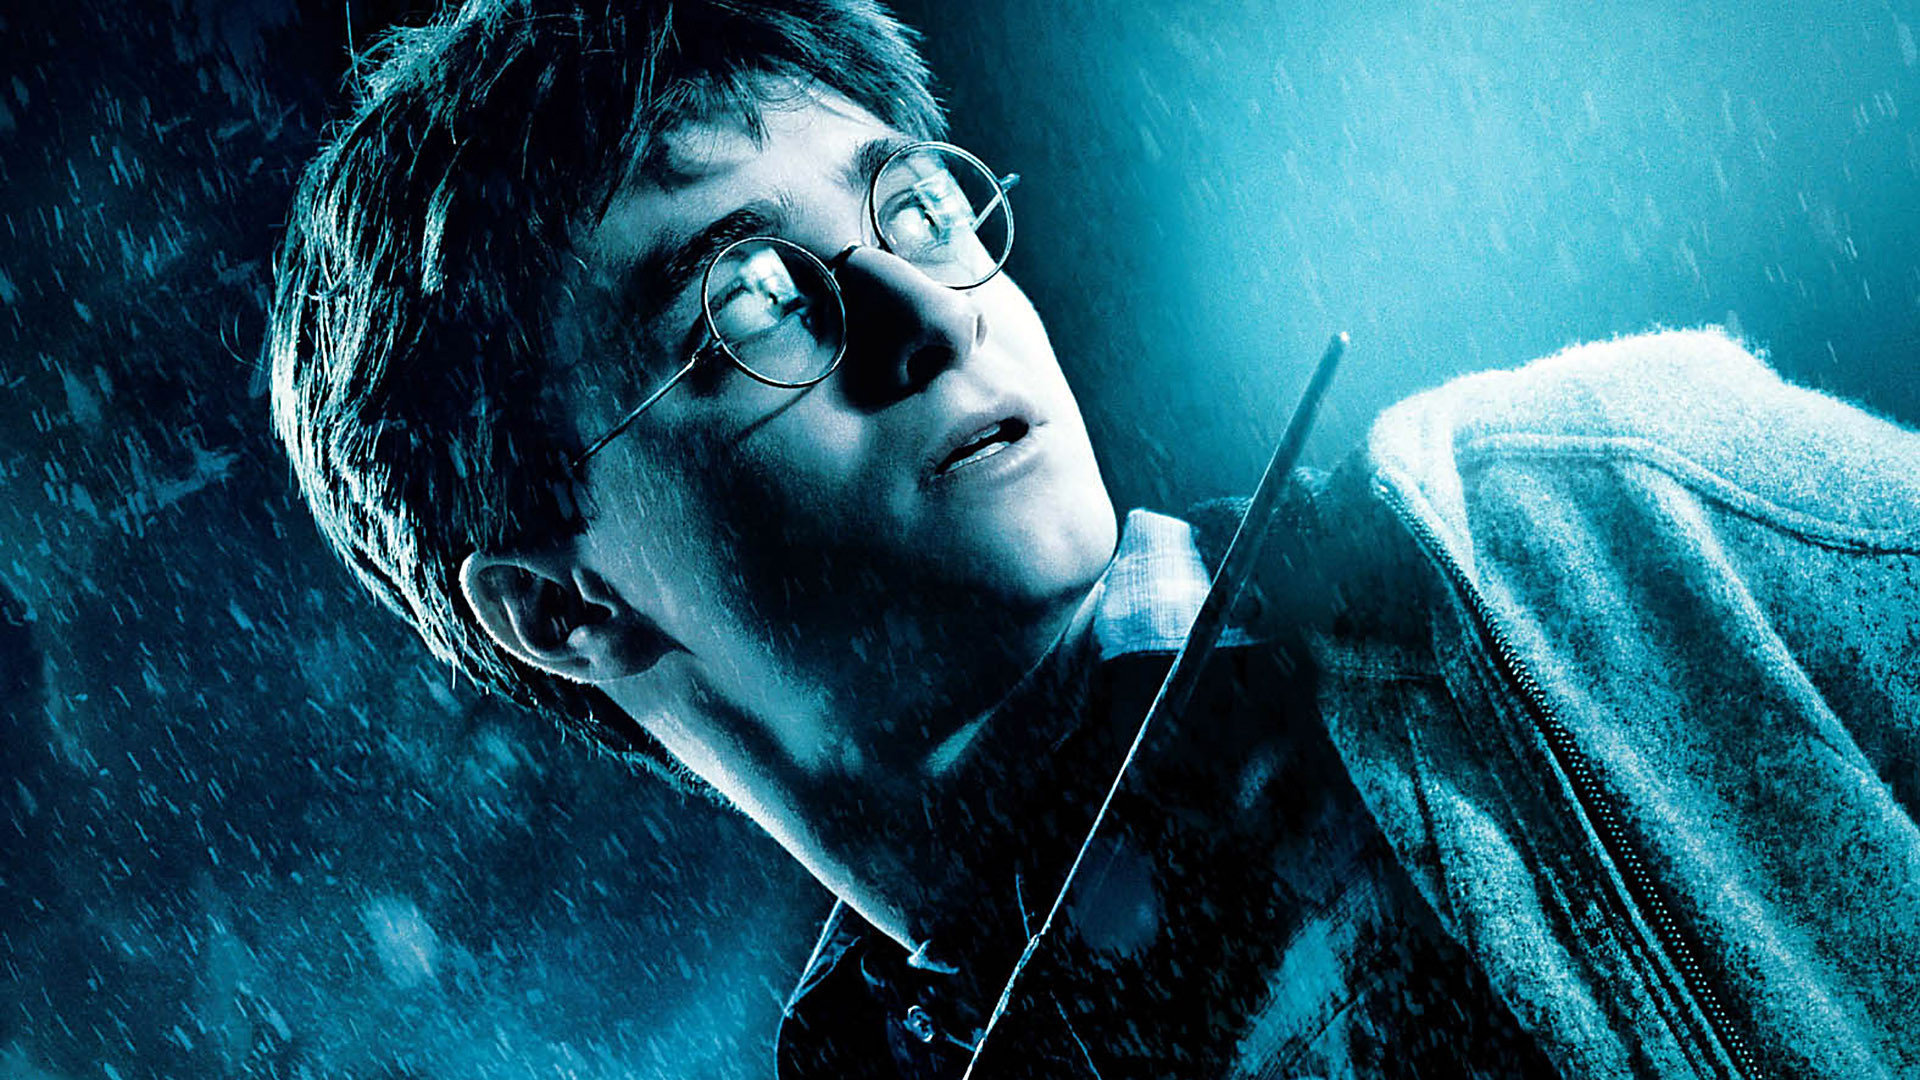 High resolution Harry Potter And The Half-blood Prince full hd 1920x1080 background ID:398851 for desktop